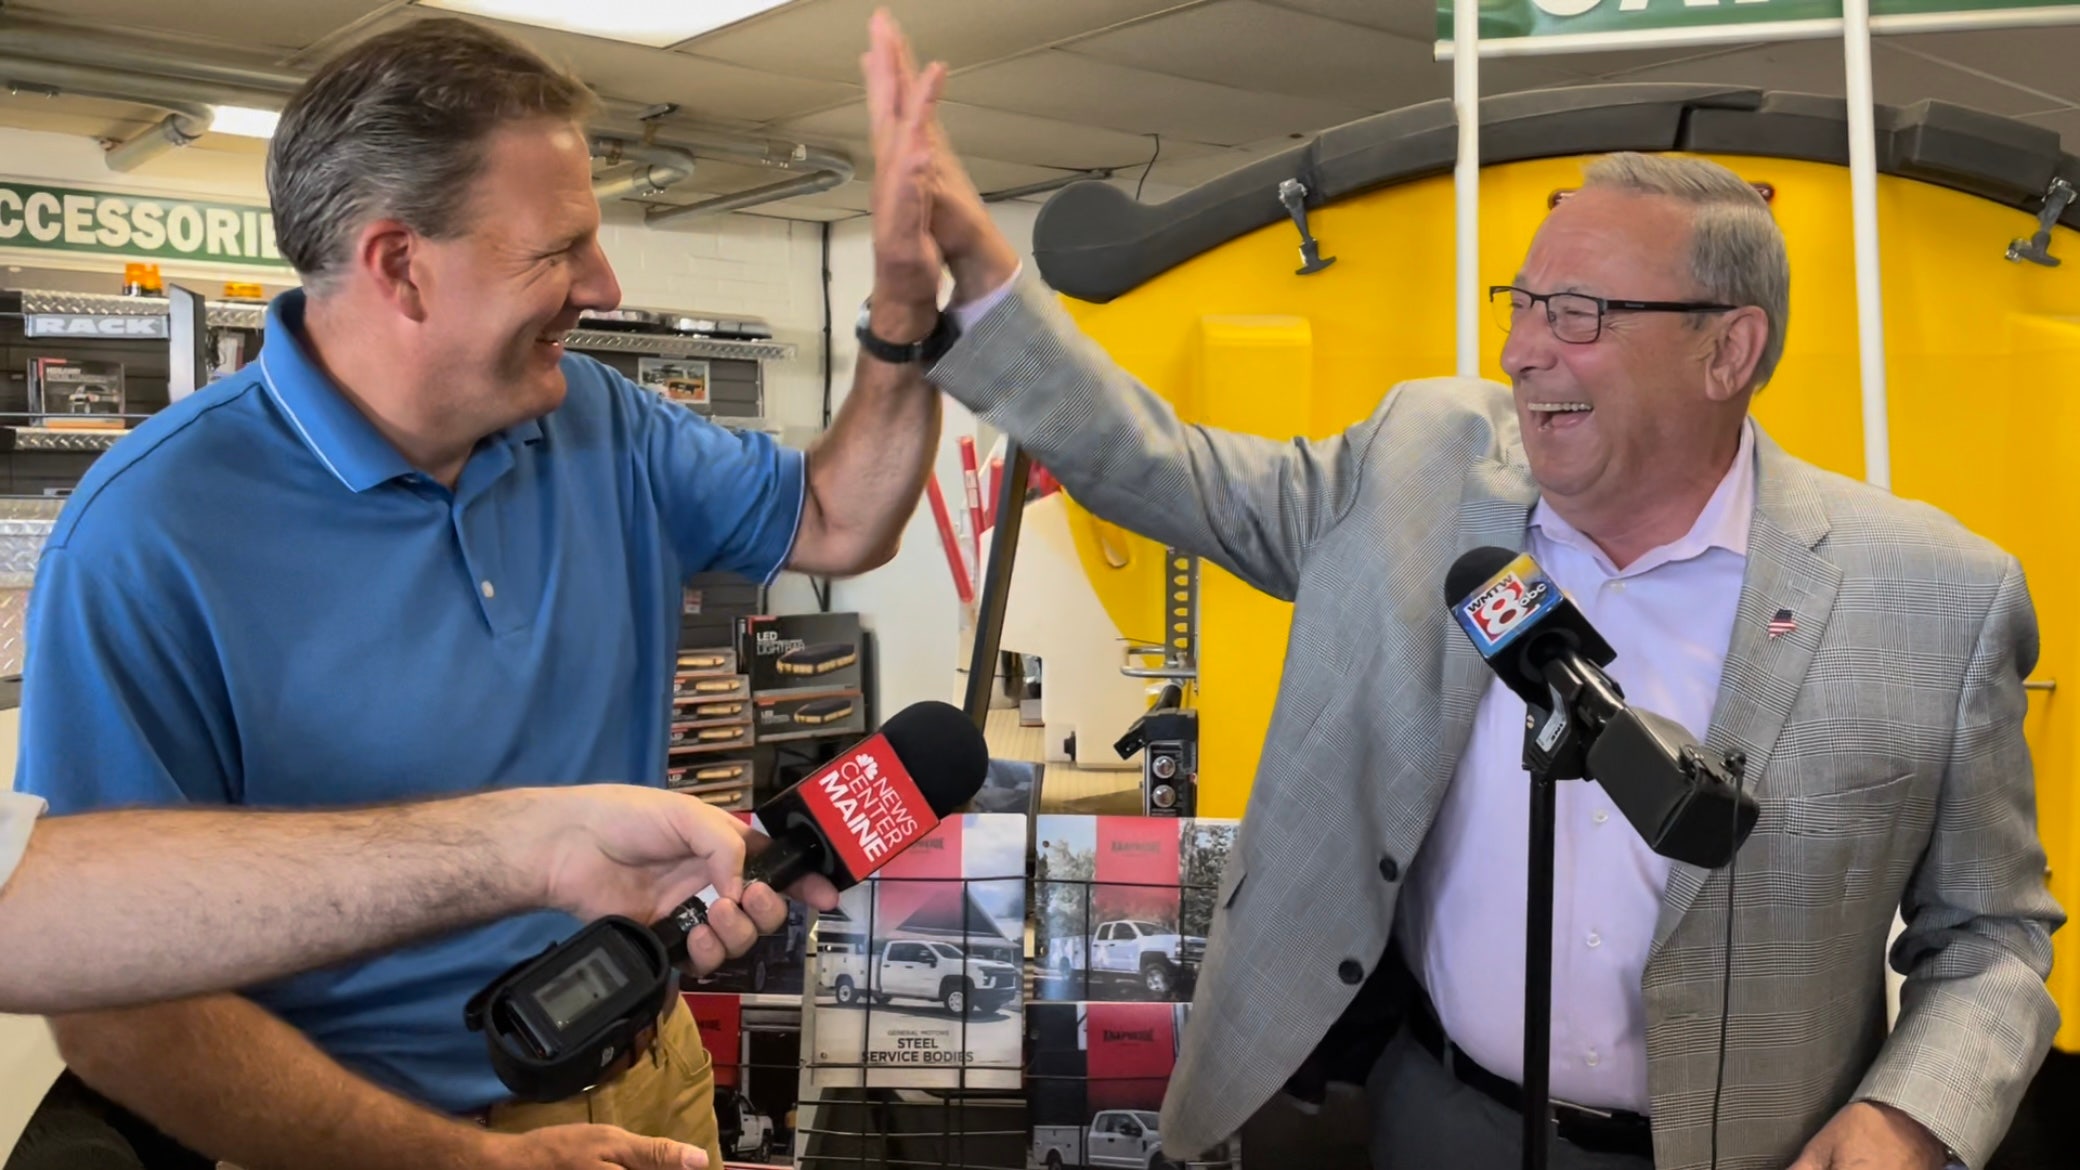 New Hampshire’s Sununu dismisses 2024 speculation, says he’s not ‘thinking past re-election’